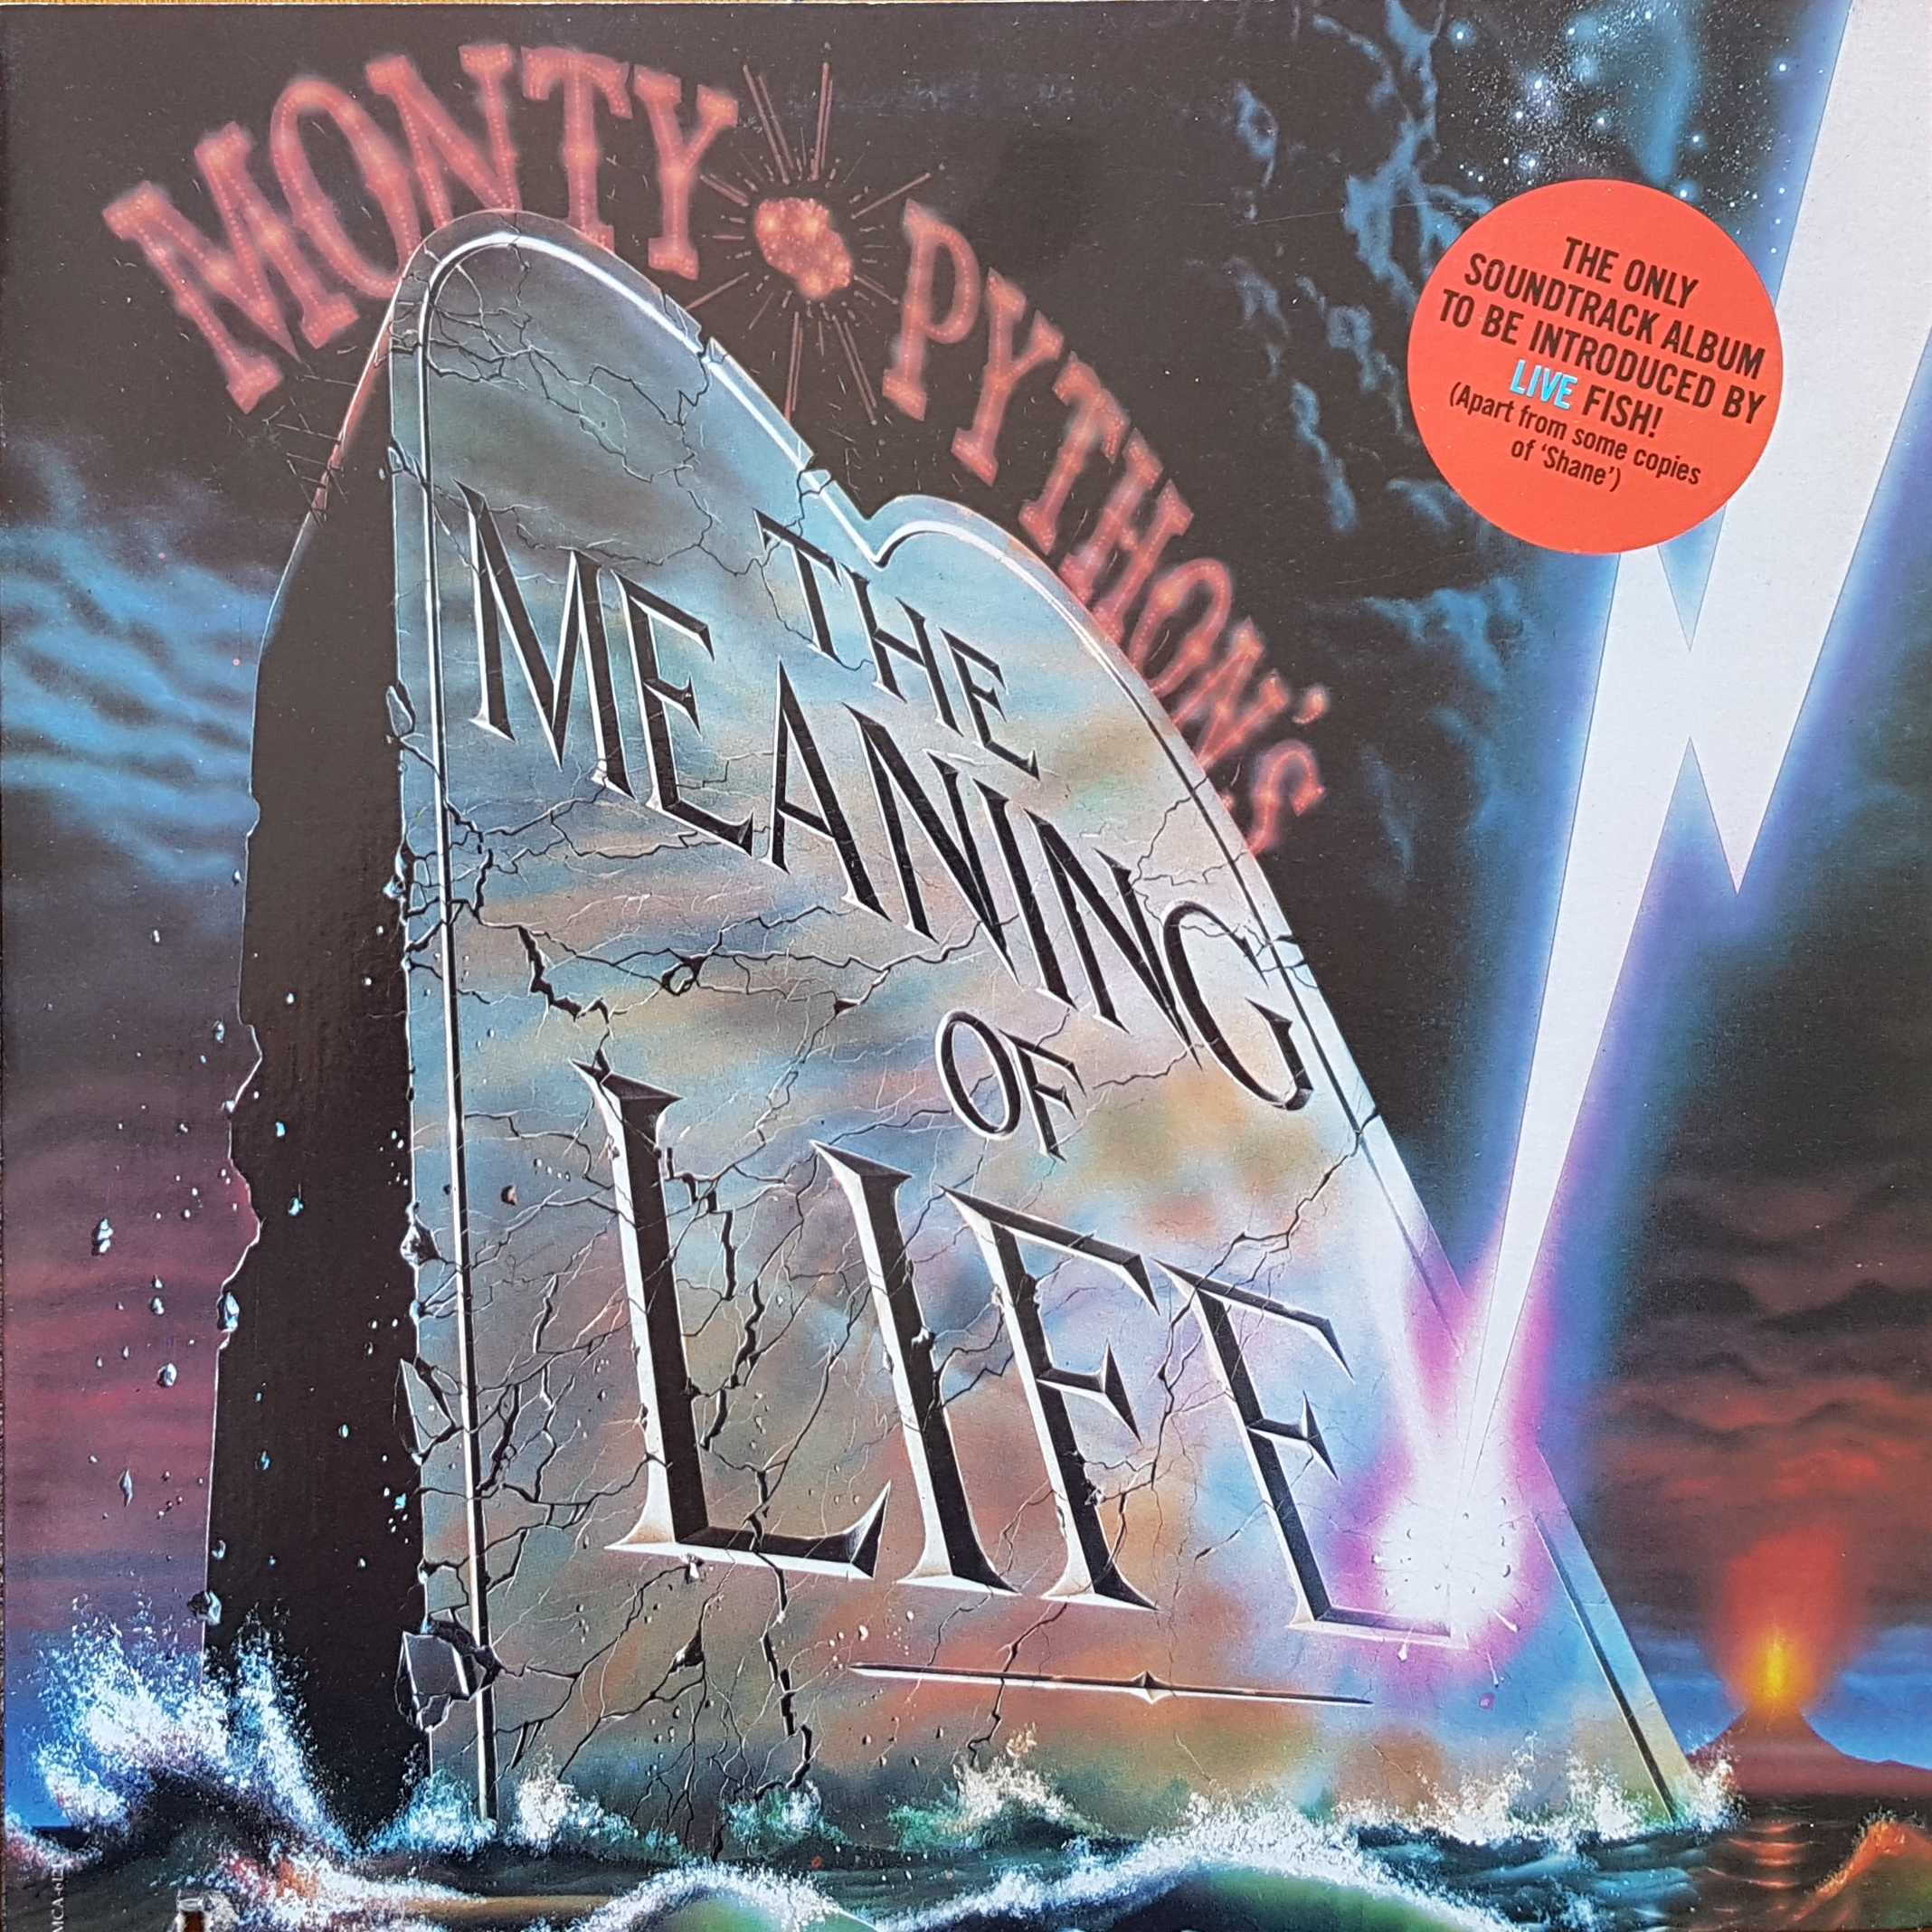 Picture of The meaning of life by artist Monty Python from the BBC albums - Records and Tapes library